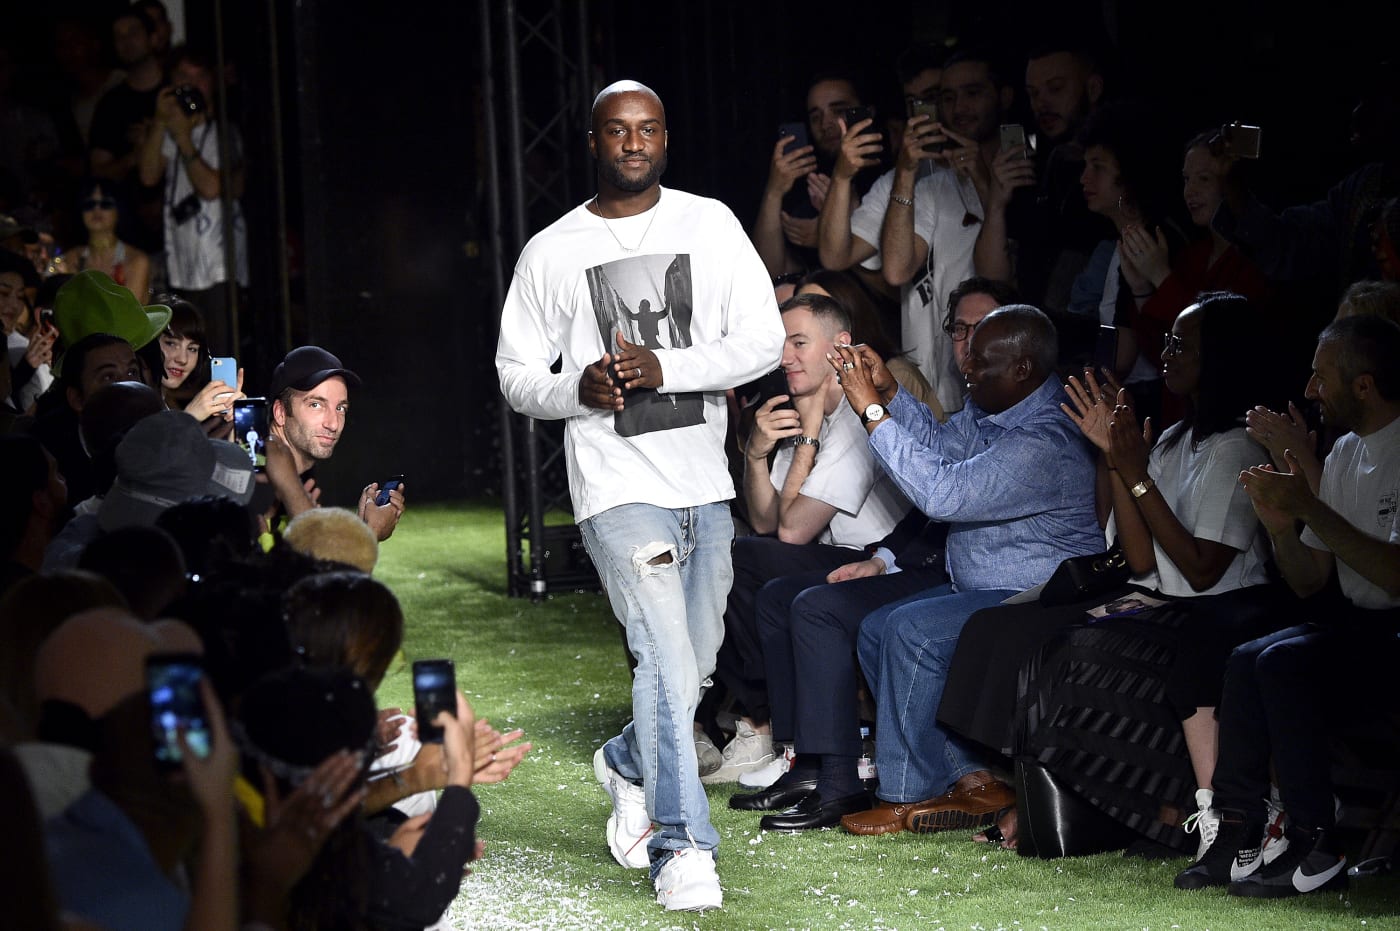 Virgil Abloh Own Off-White, But He Its Trademark. Here's What That Means. | Complex